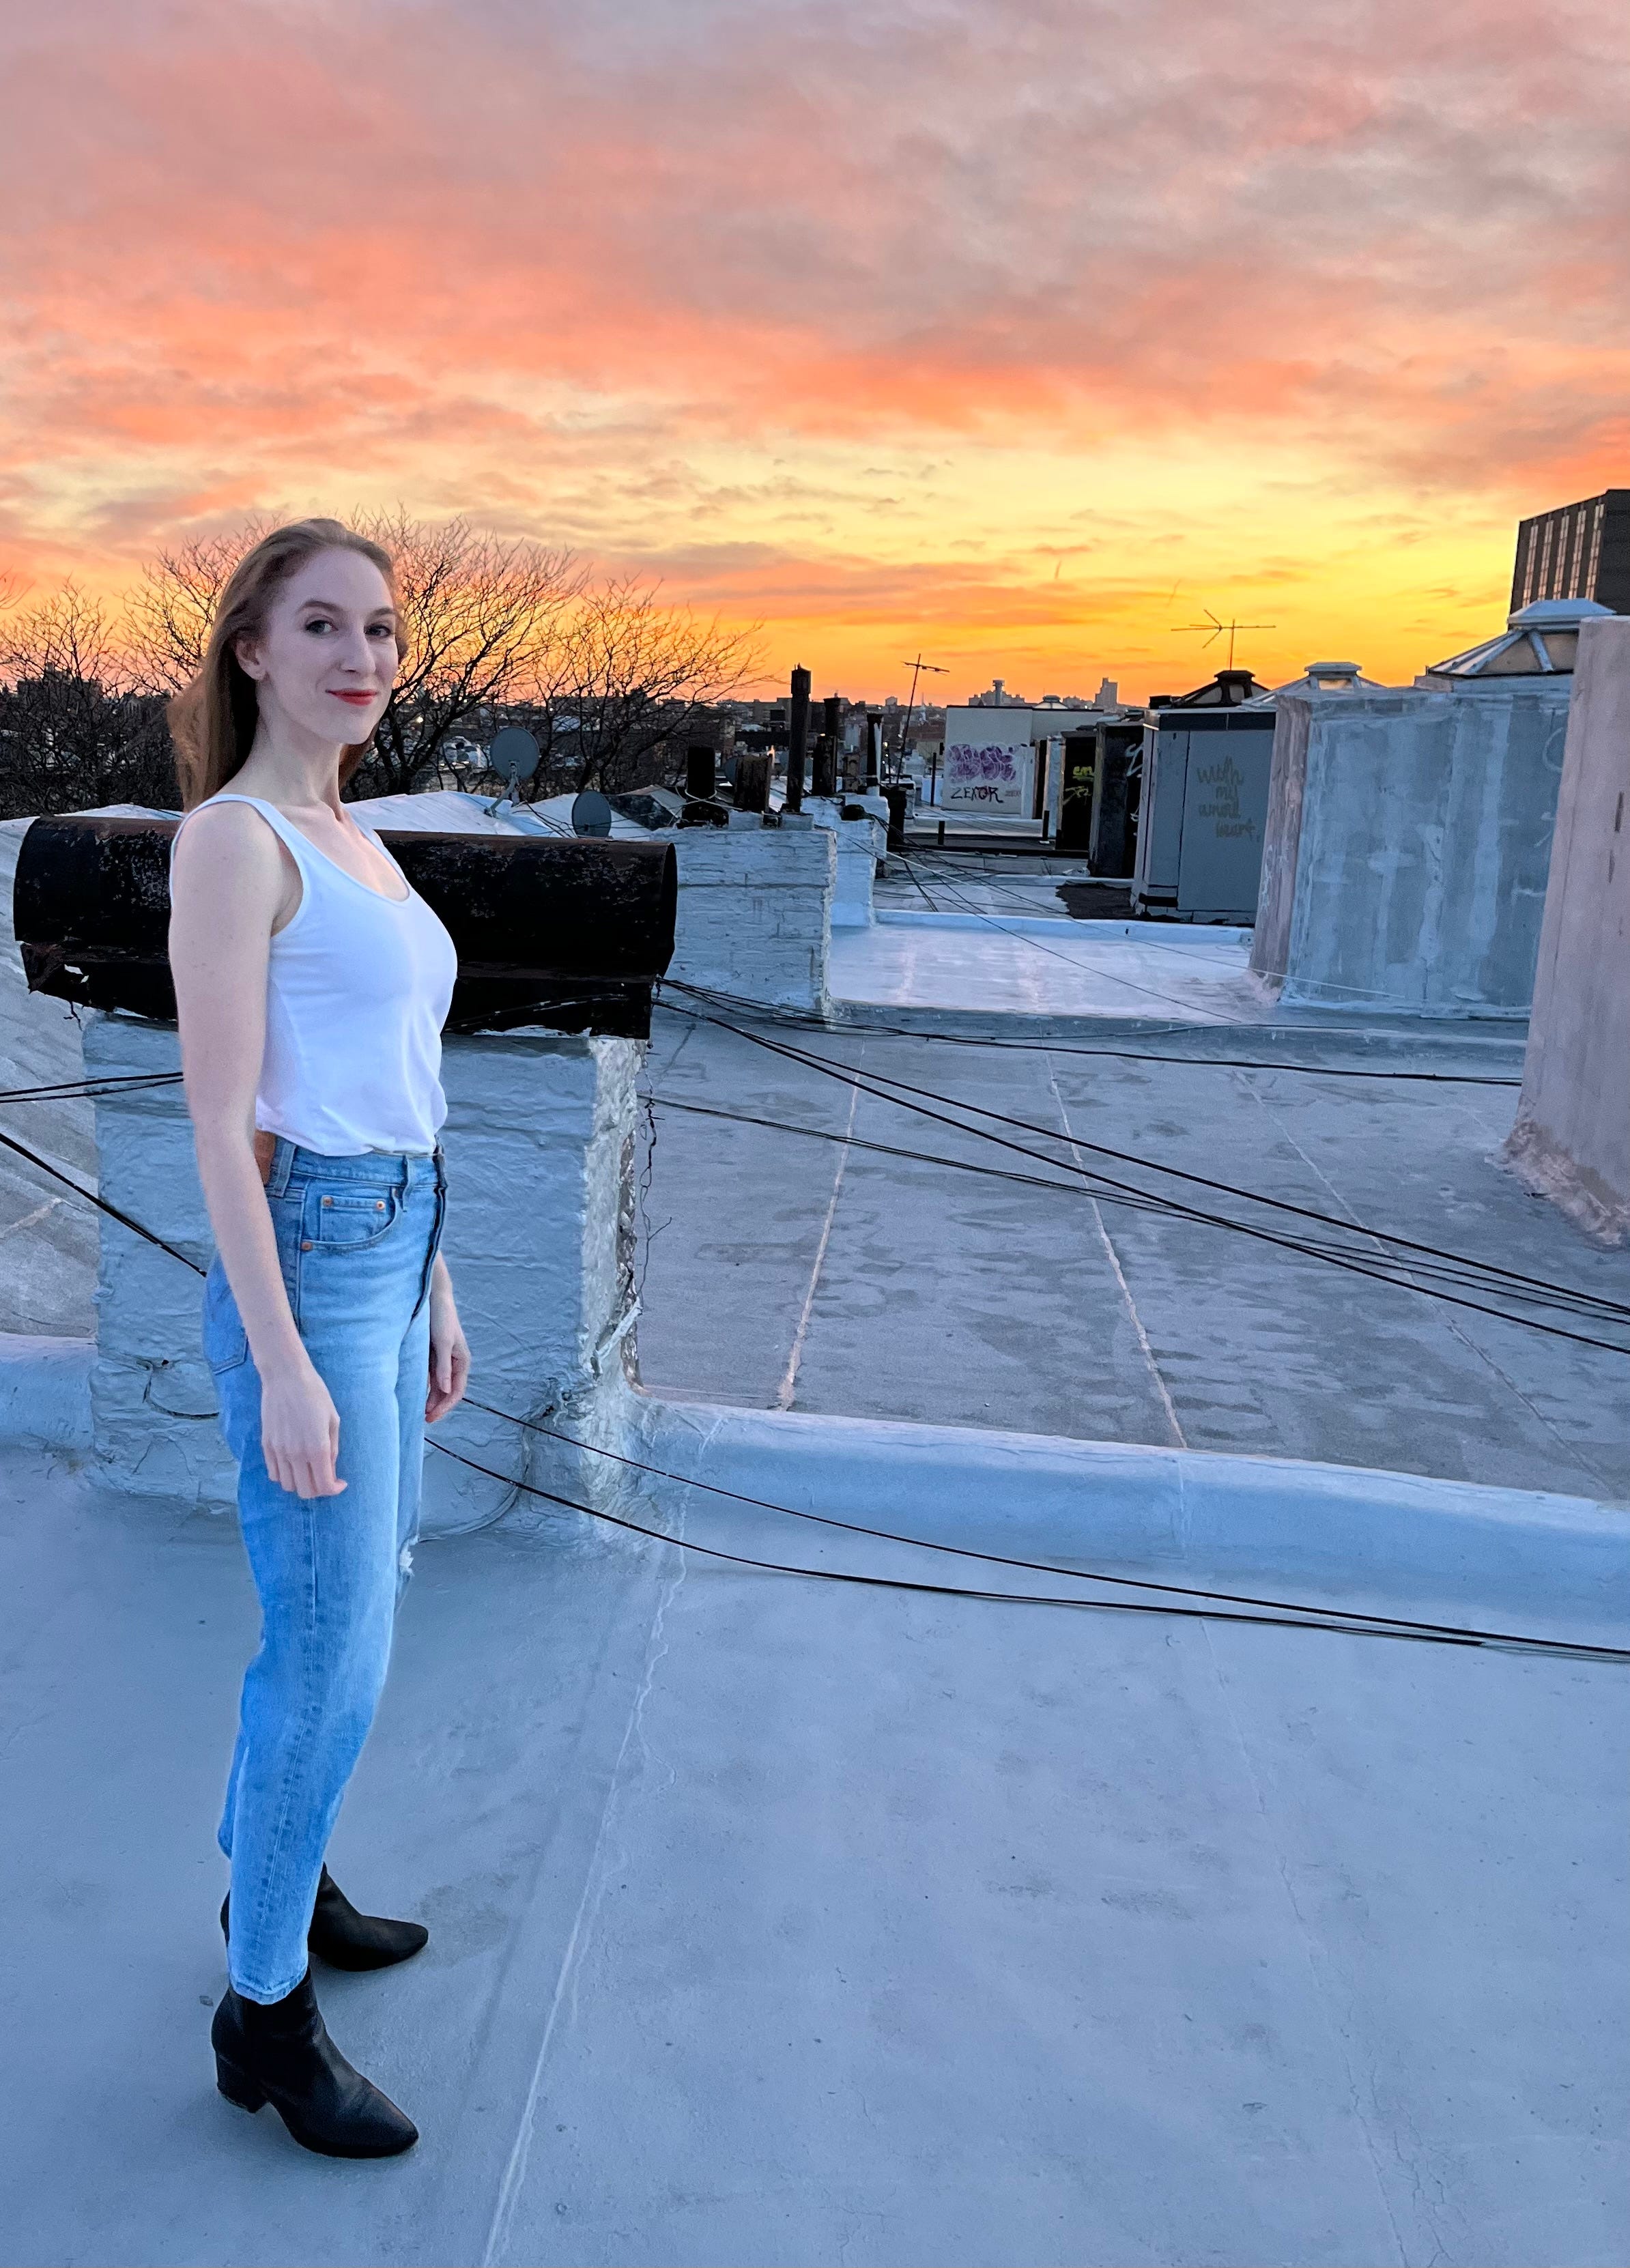 A young woman stands on a rooftop, looking at the camera as the sun sets behind her.